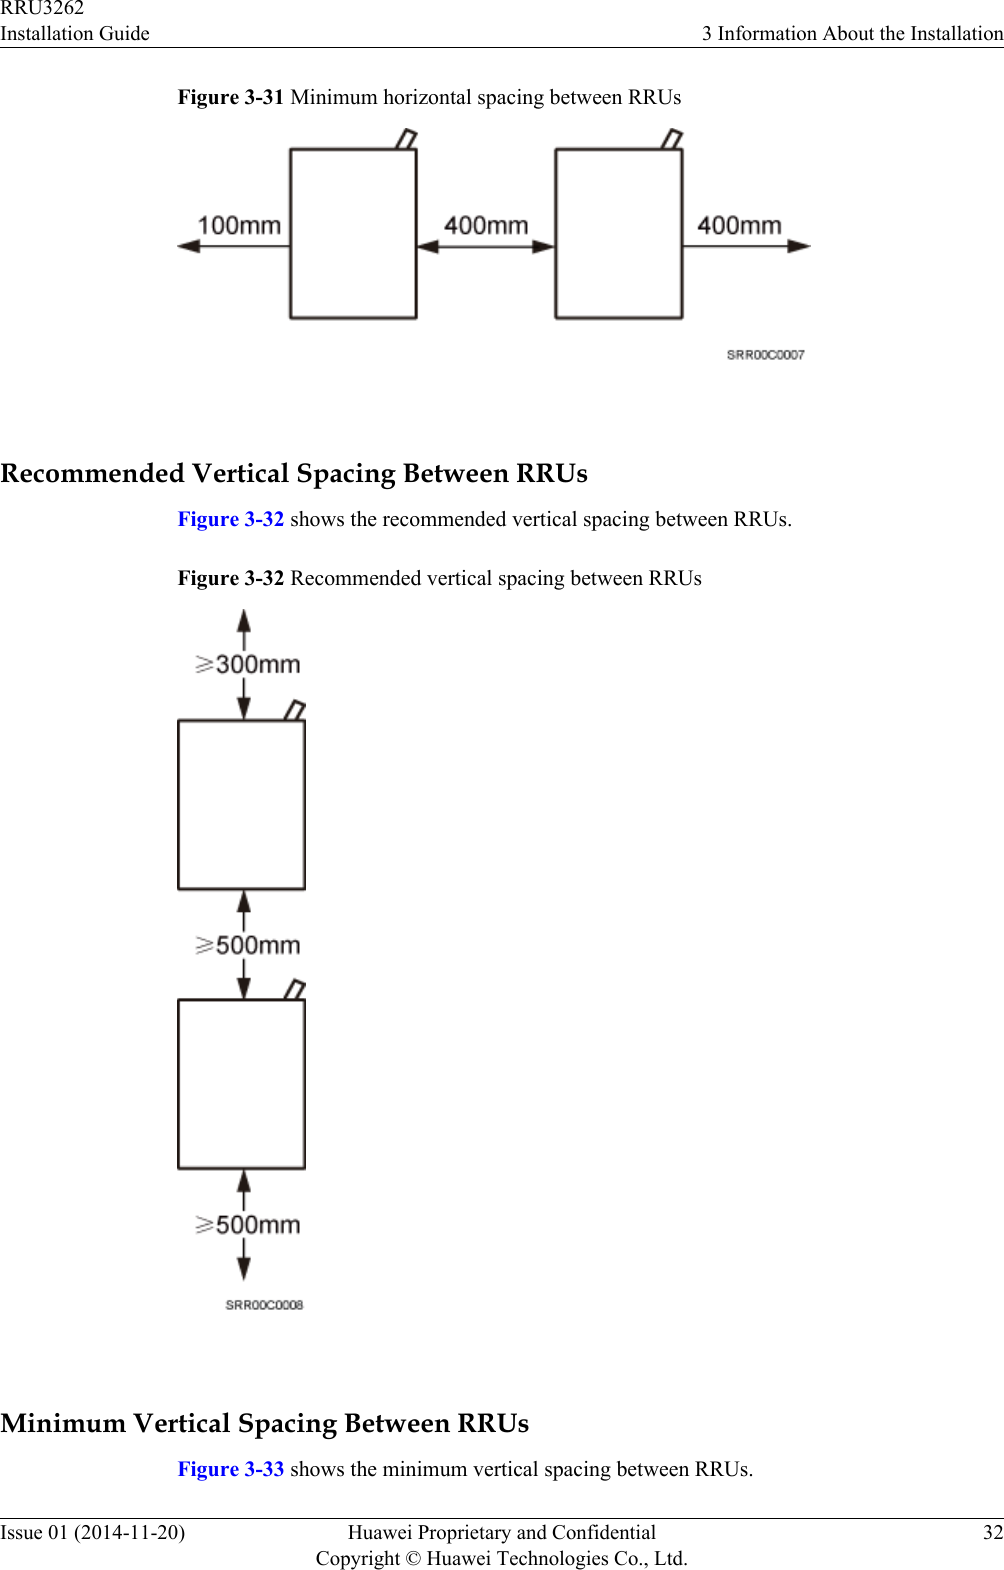 Figure 3-31 Minimum horizontal spacing between RRUs Recommended Vertical Spacing Between RRUsFigure 3-32 shows the recommended vertical spacing between RRUs.Figure 3-32 Recommended vertical spacing between RRUs Minimum Vertical Spacing Between RRUsFigure 3-33 shows the minimum vertical spacing between RRUs.RRU3262Installation Guide 3 Information About the InstallationIssue 01 (2014-11-20) Huawei Proprietary and ConfidentialCopyright © Huawei Technologies Co., Ltd.32